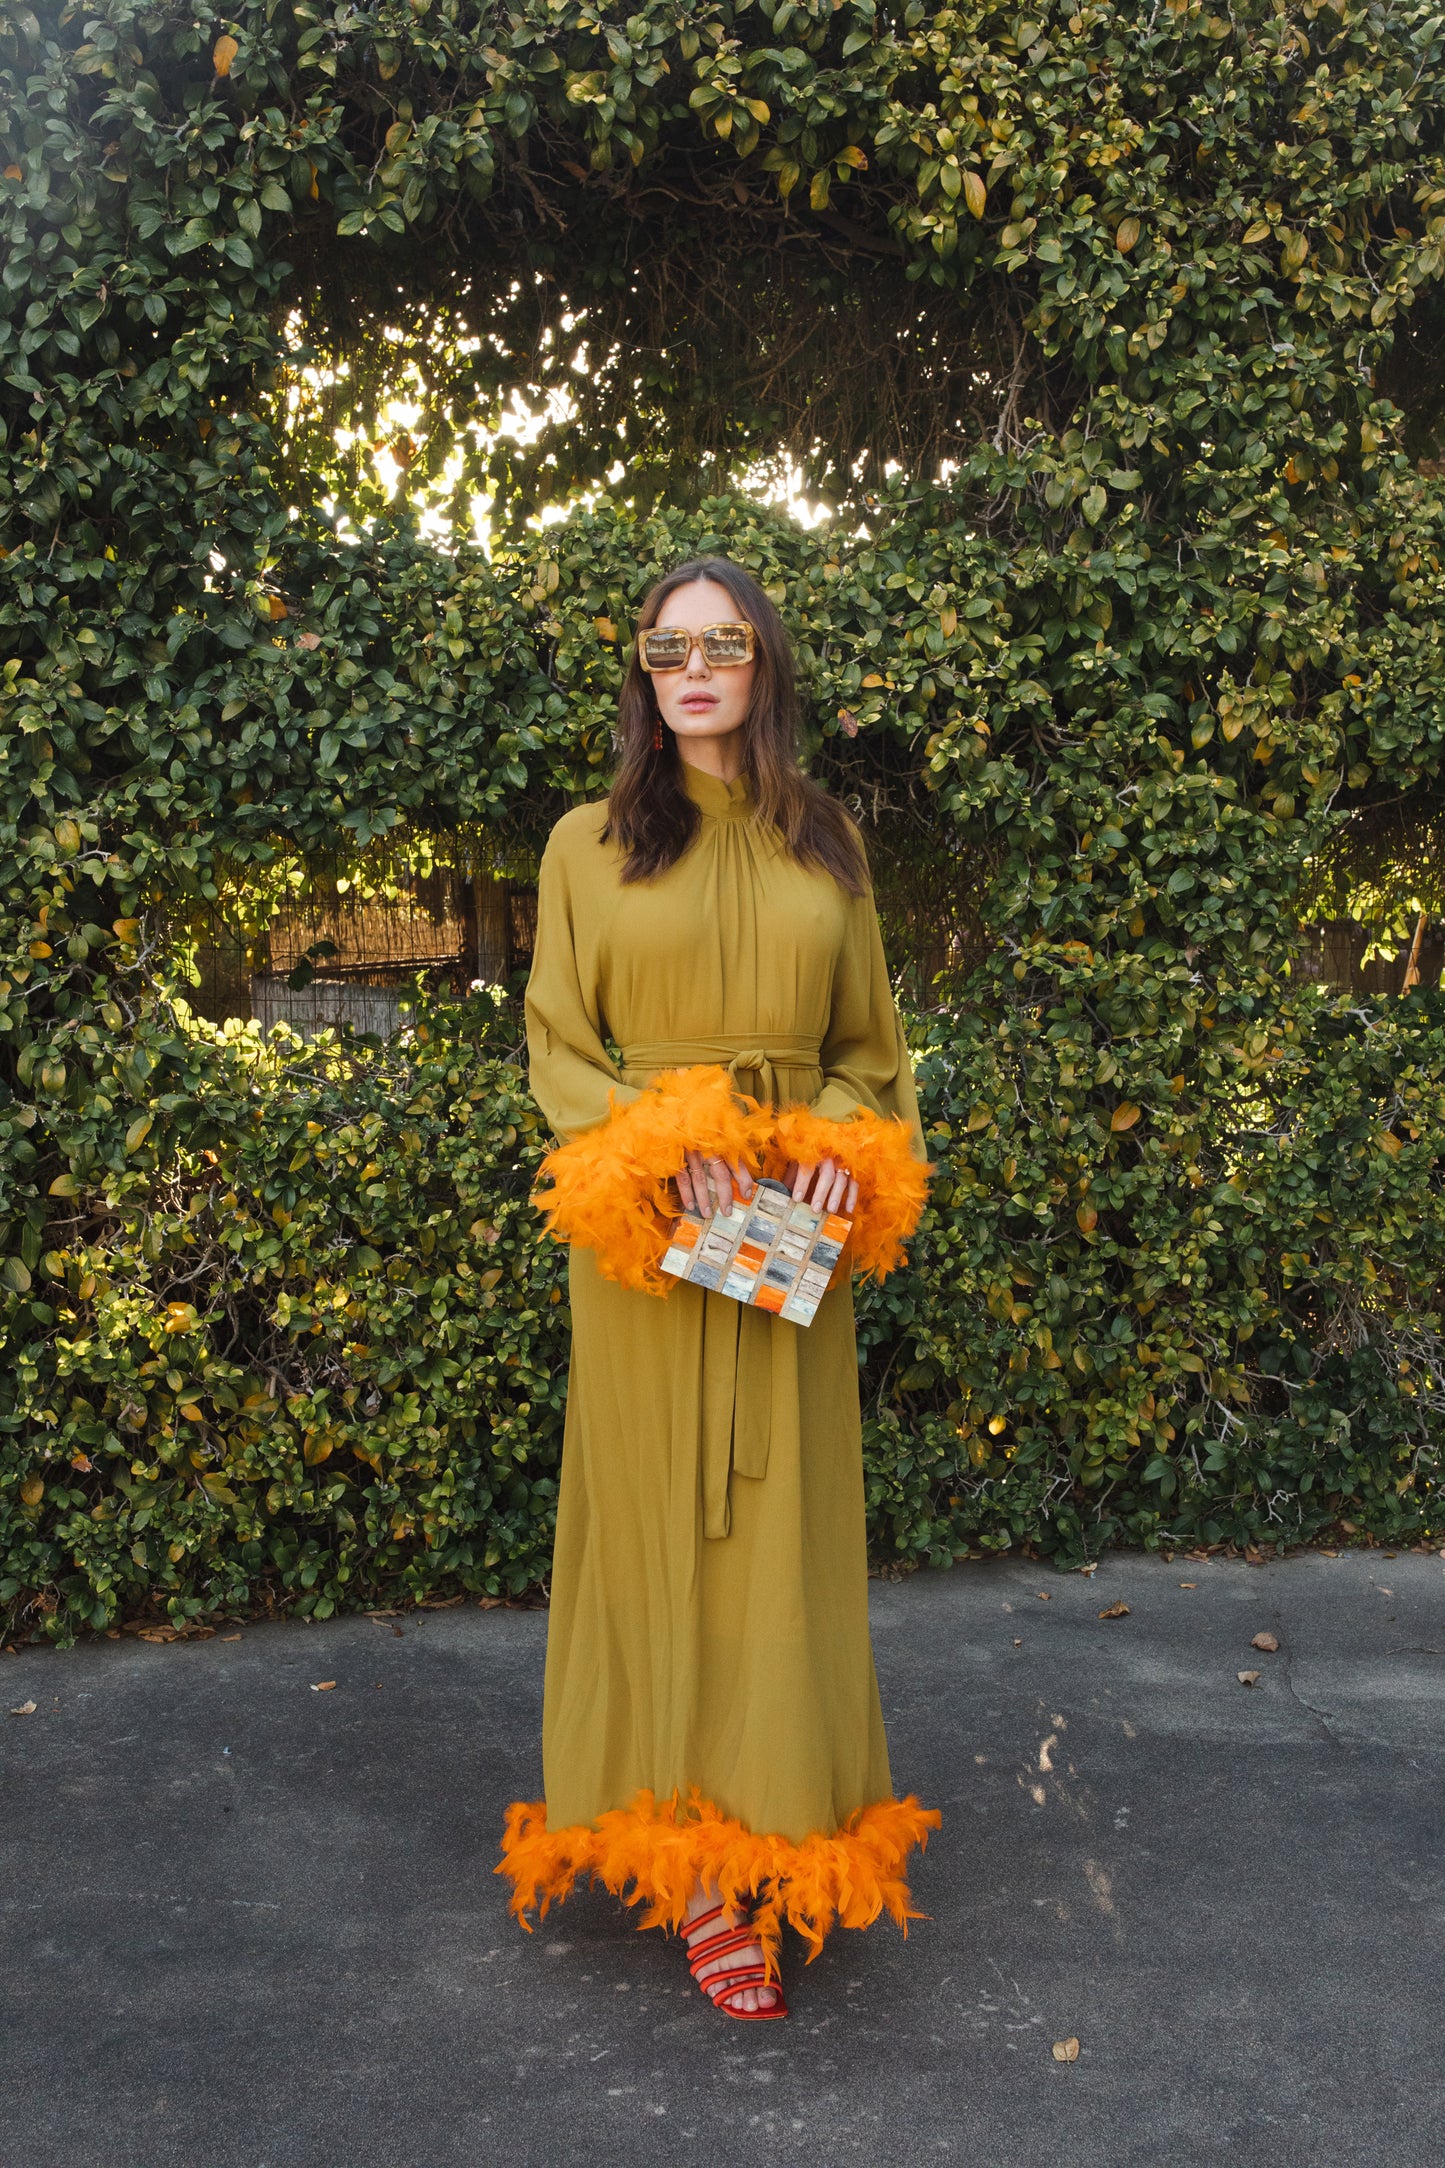 jennafer grace Darlene Roper Maxi Dress chartreuse yellow green mod dress with orange feathers at cuffs and hem high neck cinched waist tie retro 1960s 60s revival midcentury evening dress boho bohemian hippie romantic whimsical handmade in California USA